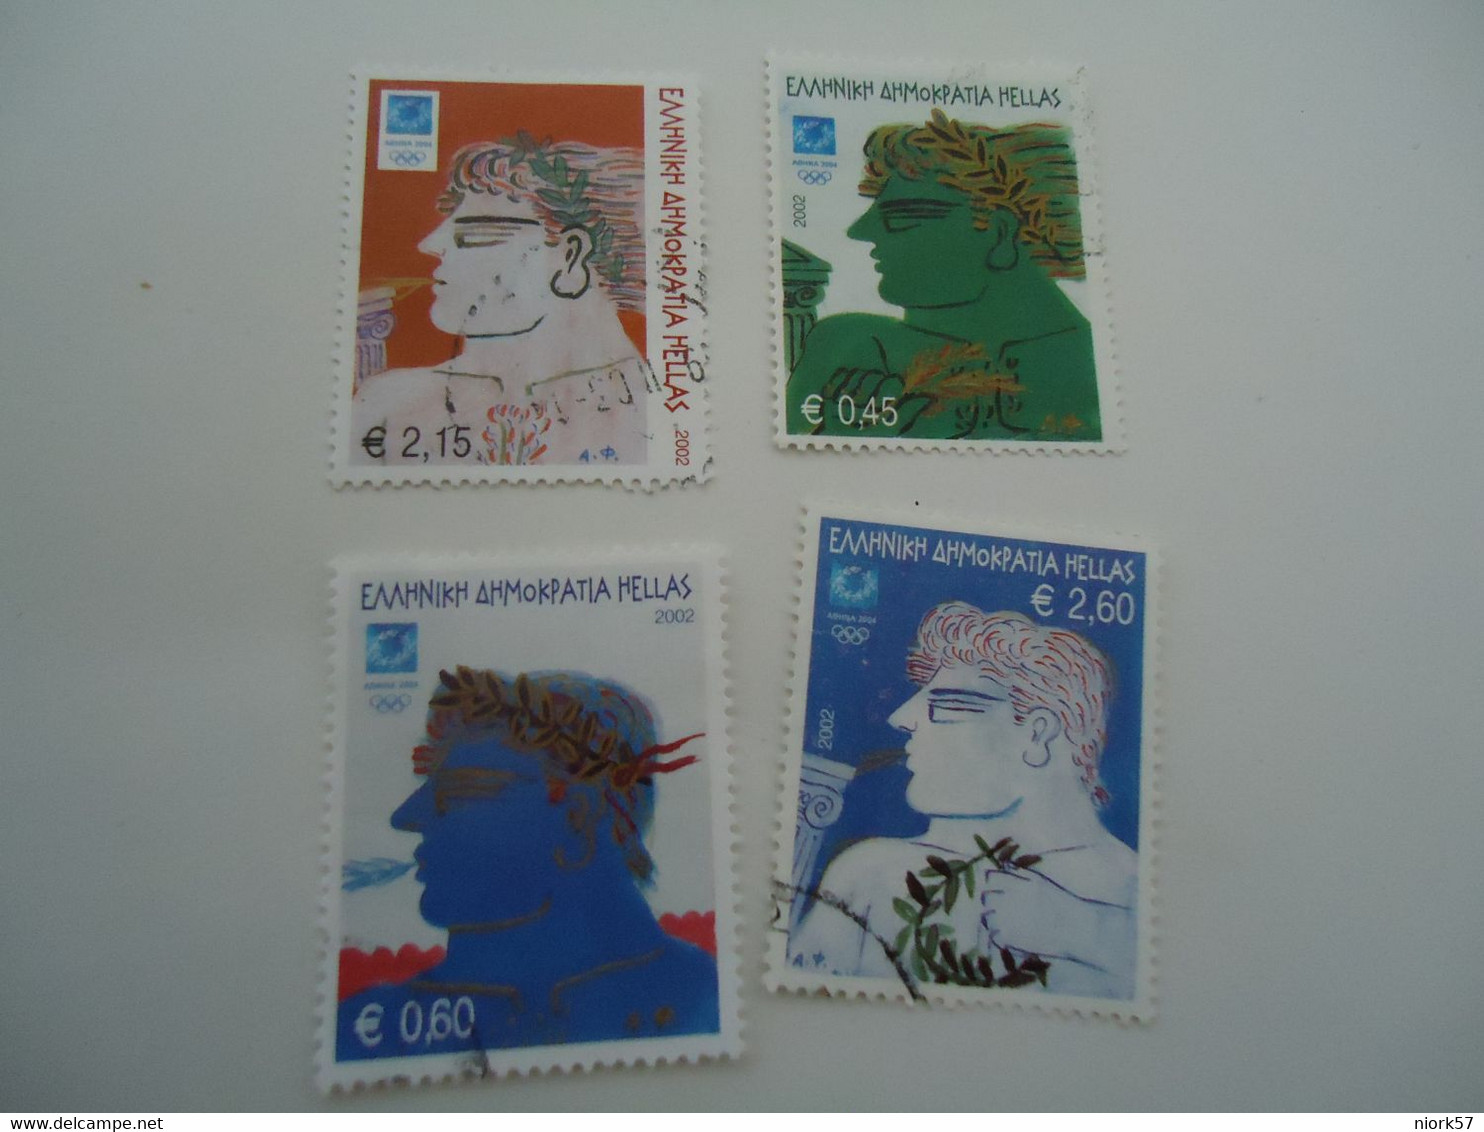 GREECE USED STAMPS SET 4 OLYMPIG GAMES ATHENS 2004 HE WINNERS 2002 - Zomer 2004: Athene - Paralympics